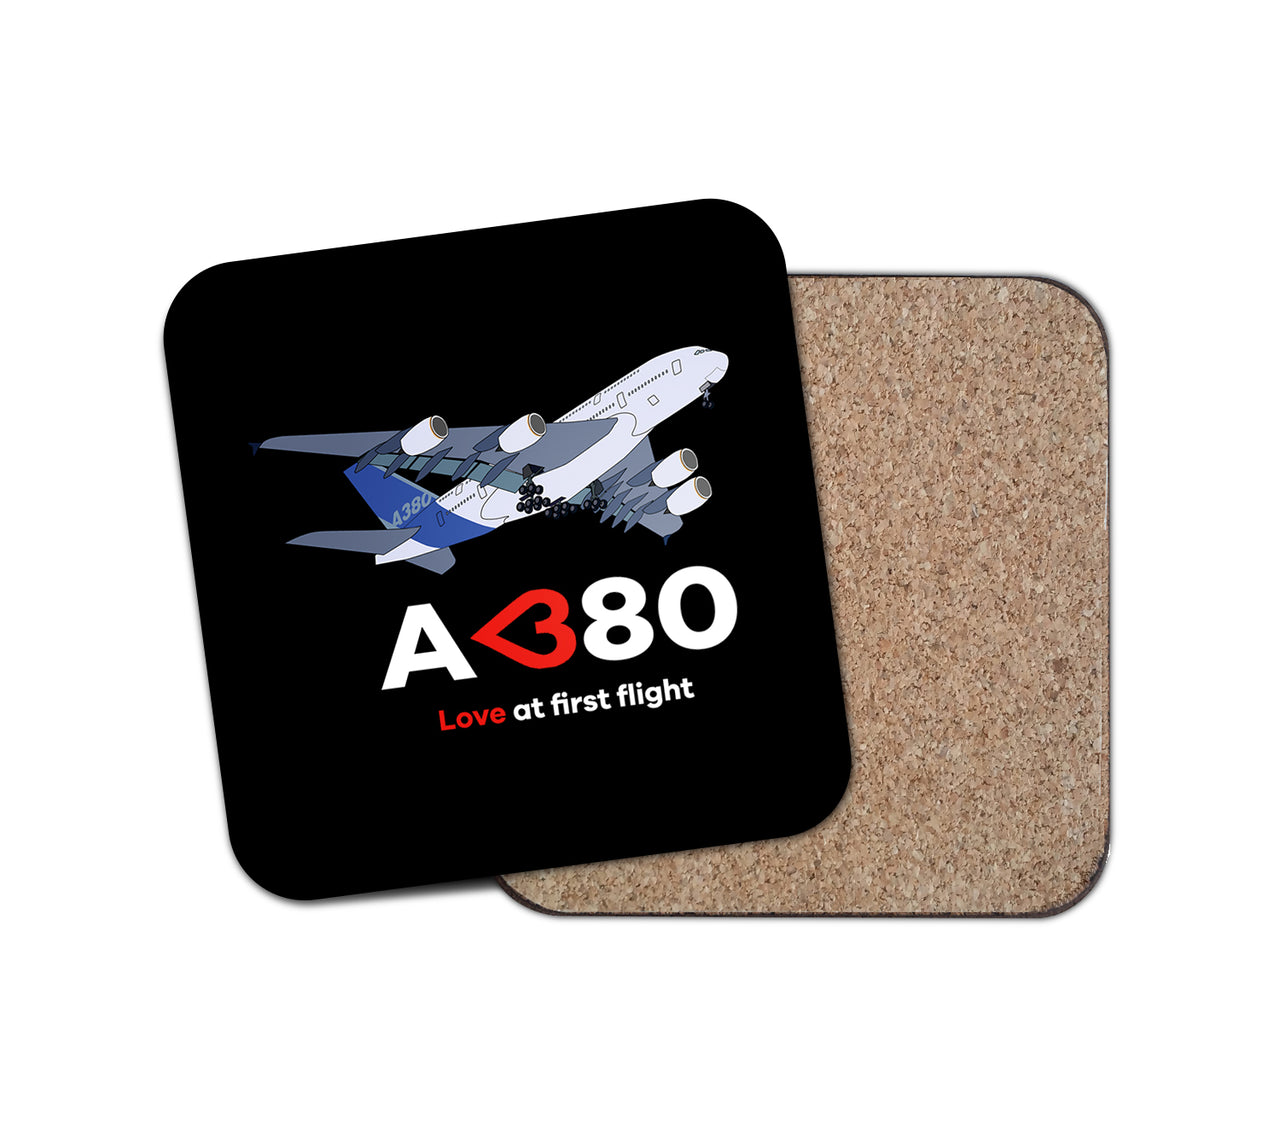 Airbus A380 Love at first flight Designed Coasters